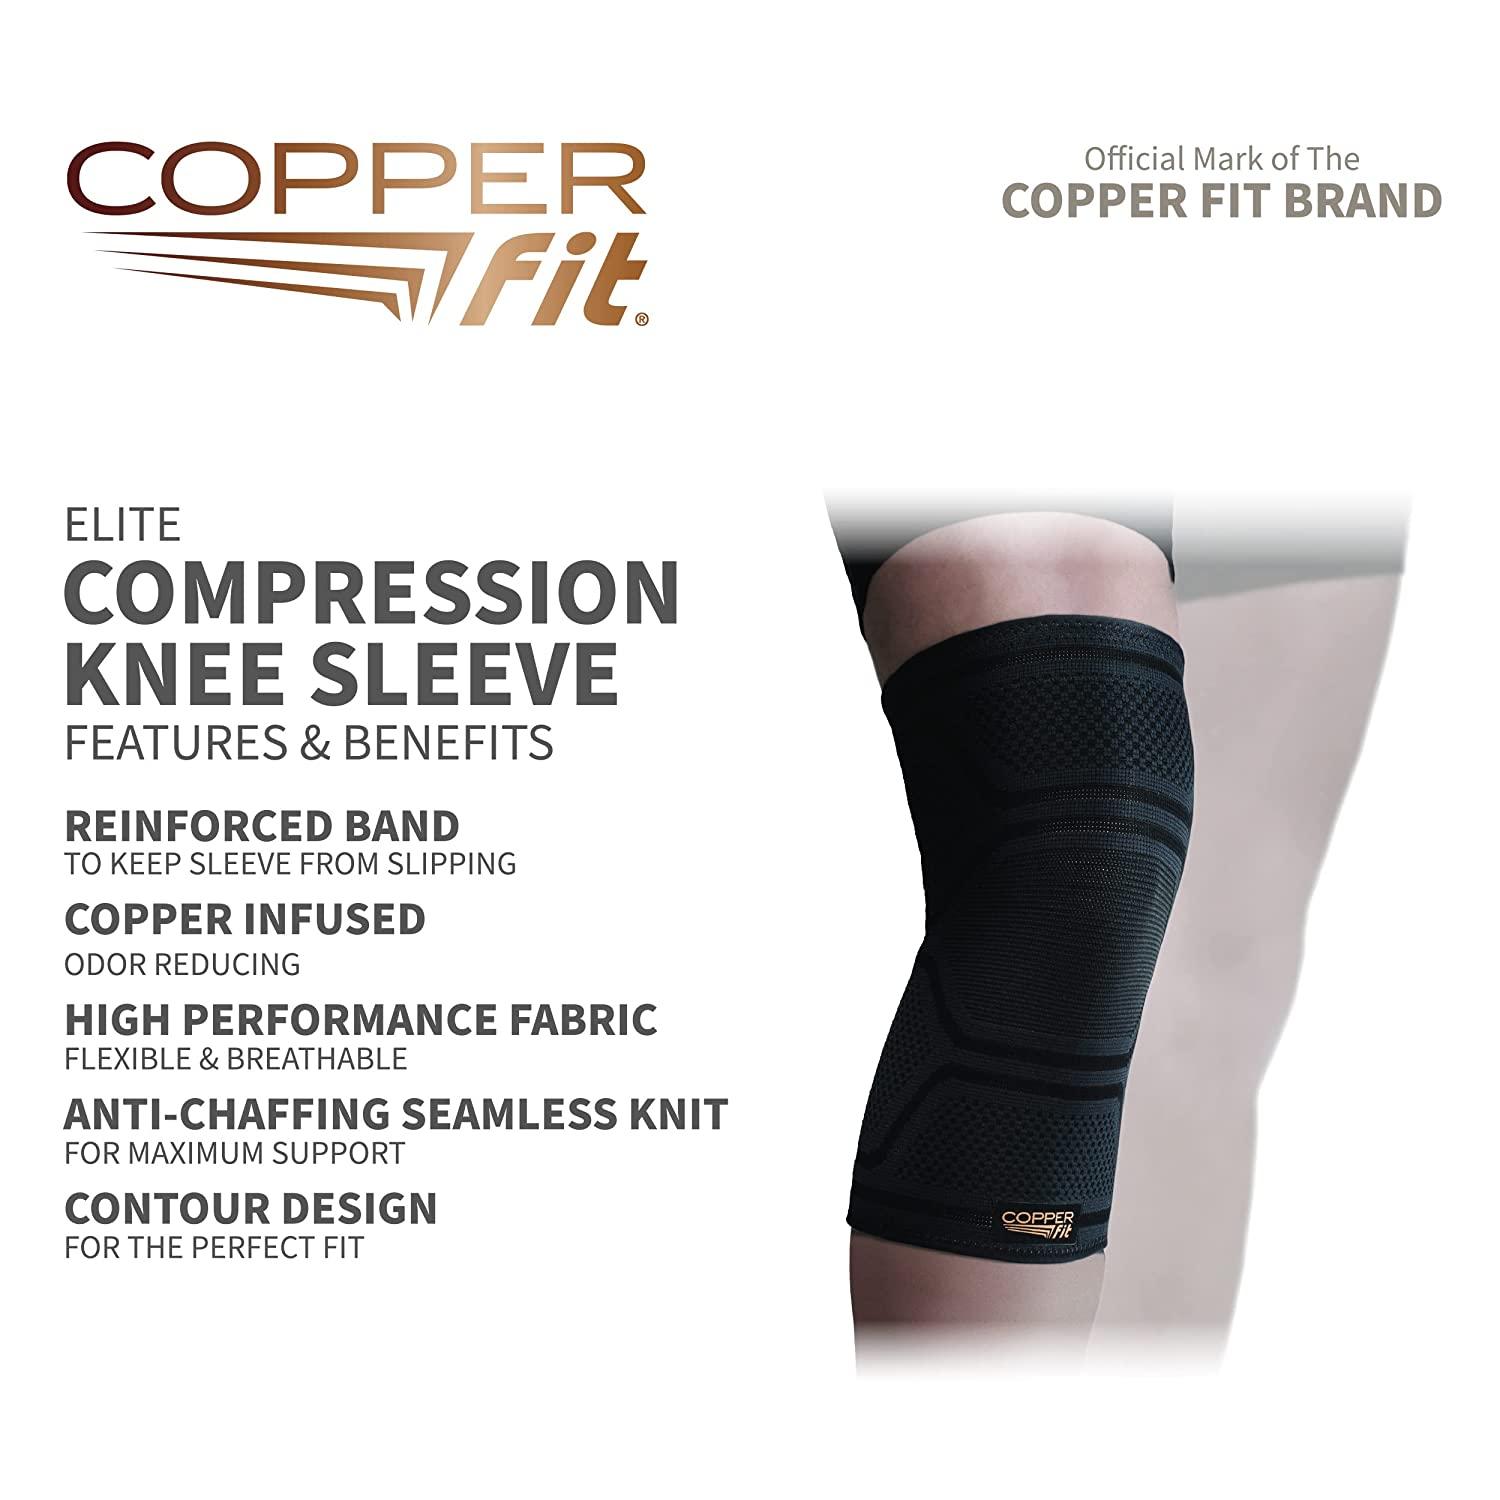 COPPER,FIT,KNEE,SLEEVE